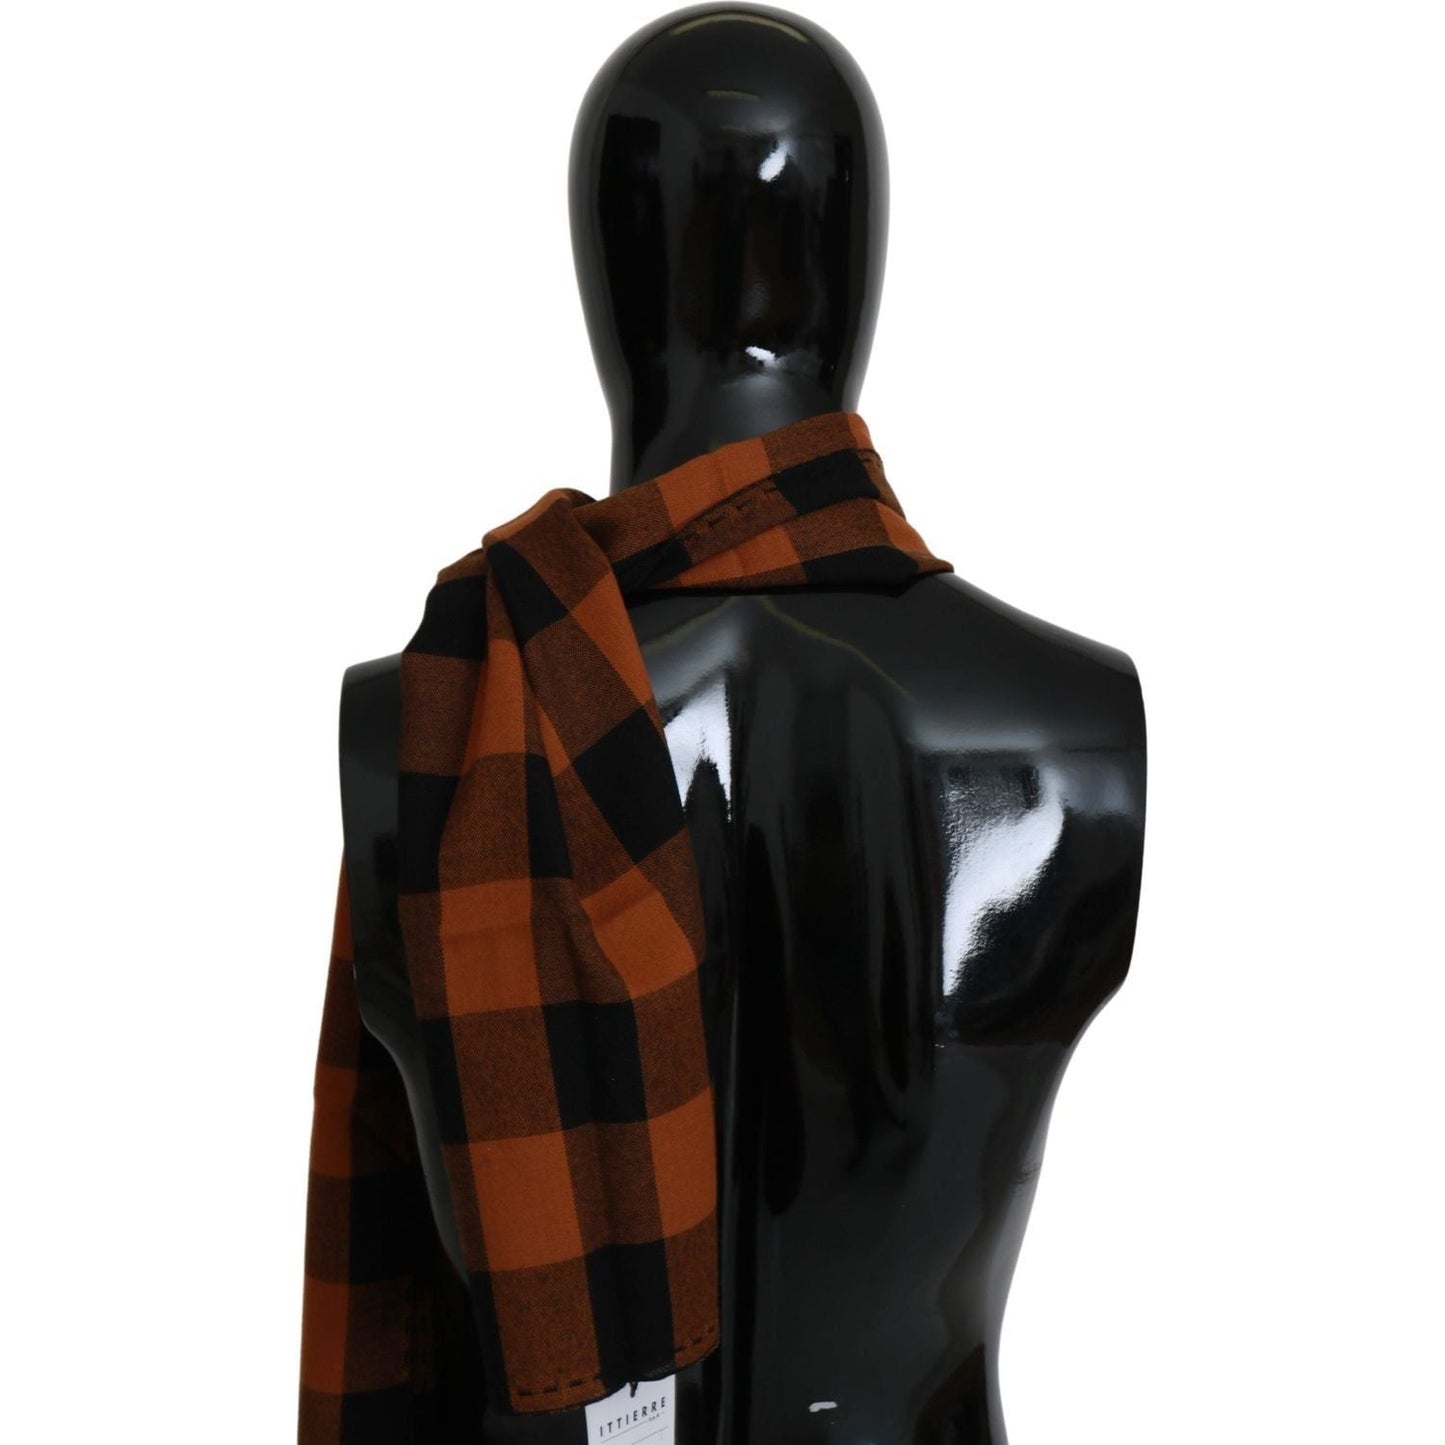 Chic Orange Check Wool Blend Scarf Costume National